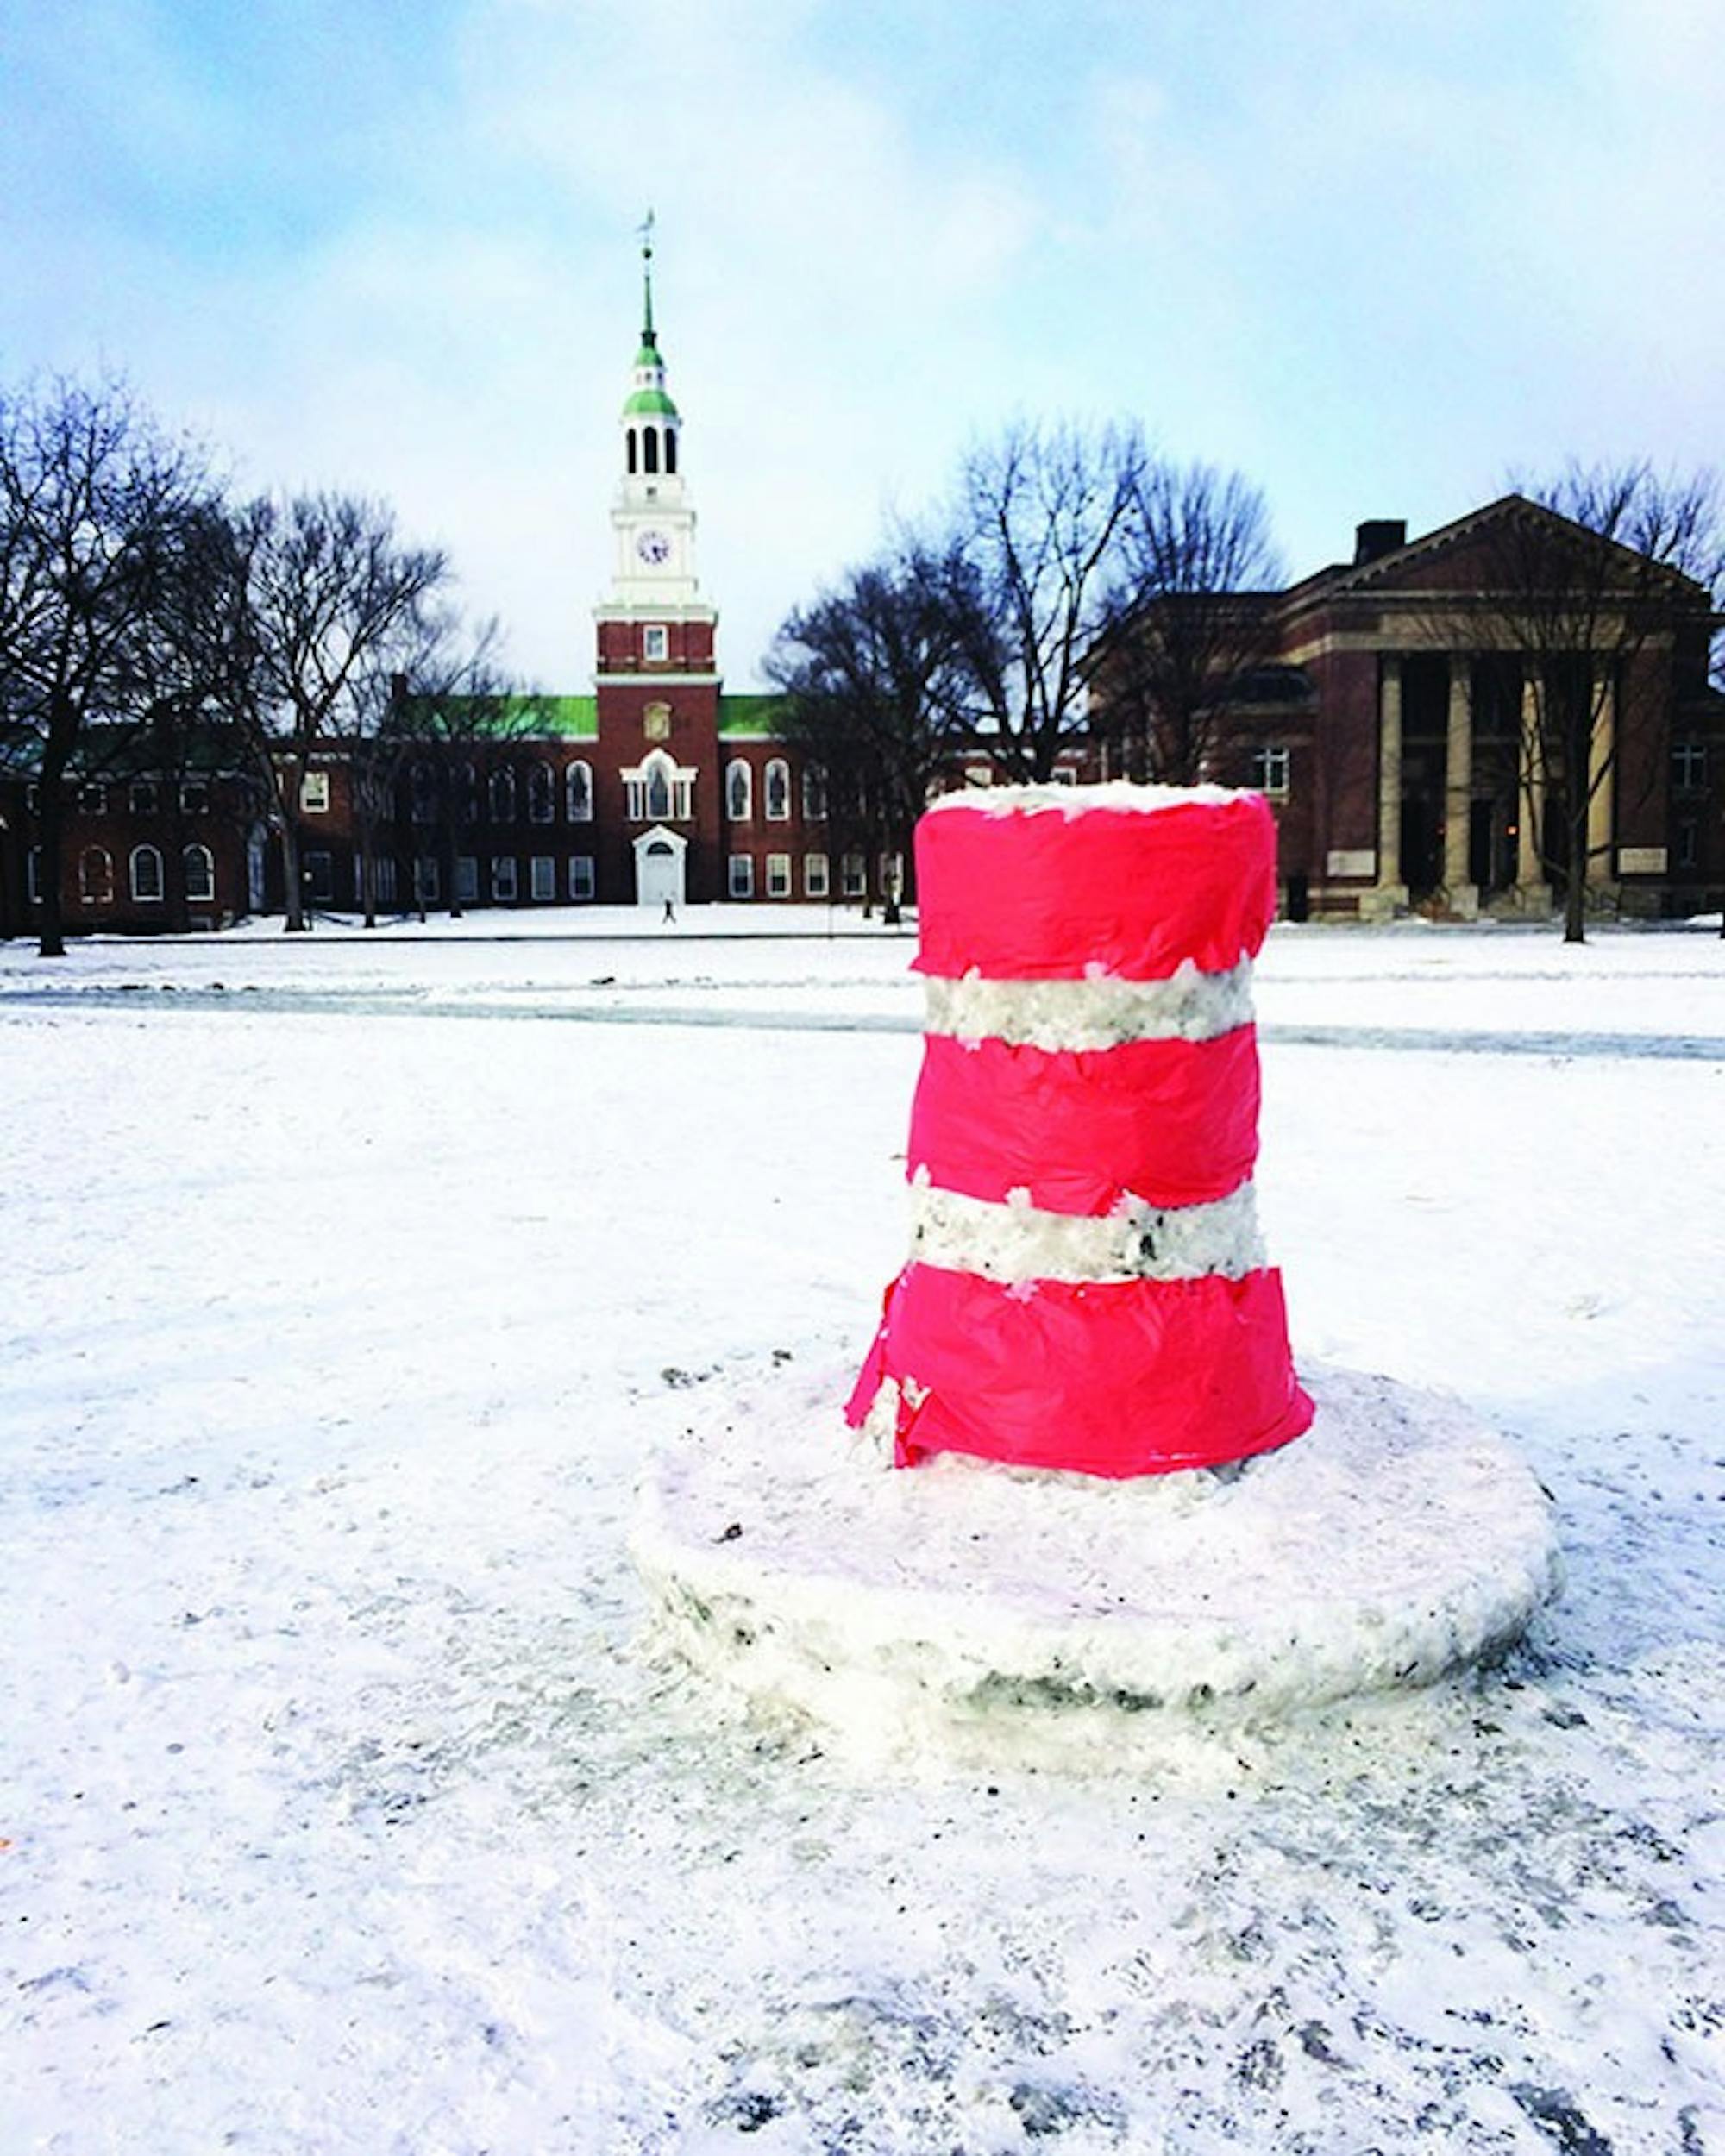 Thomas Rover ’16 organized students to build a snow sculpture despite its official cancellation.